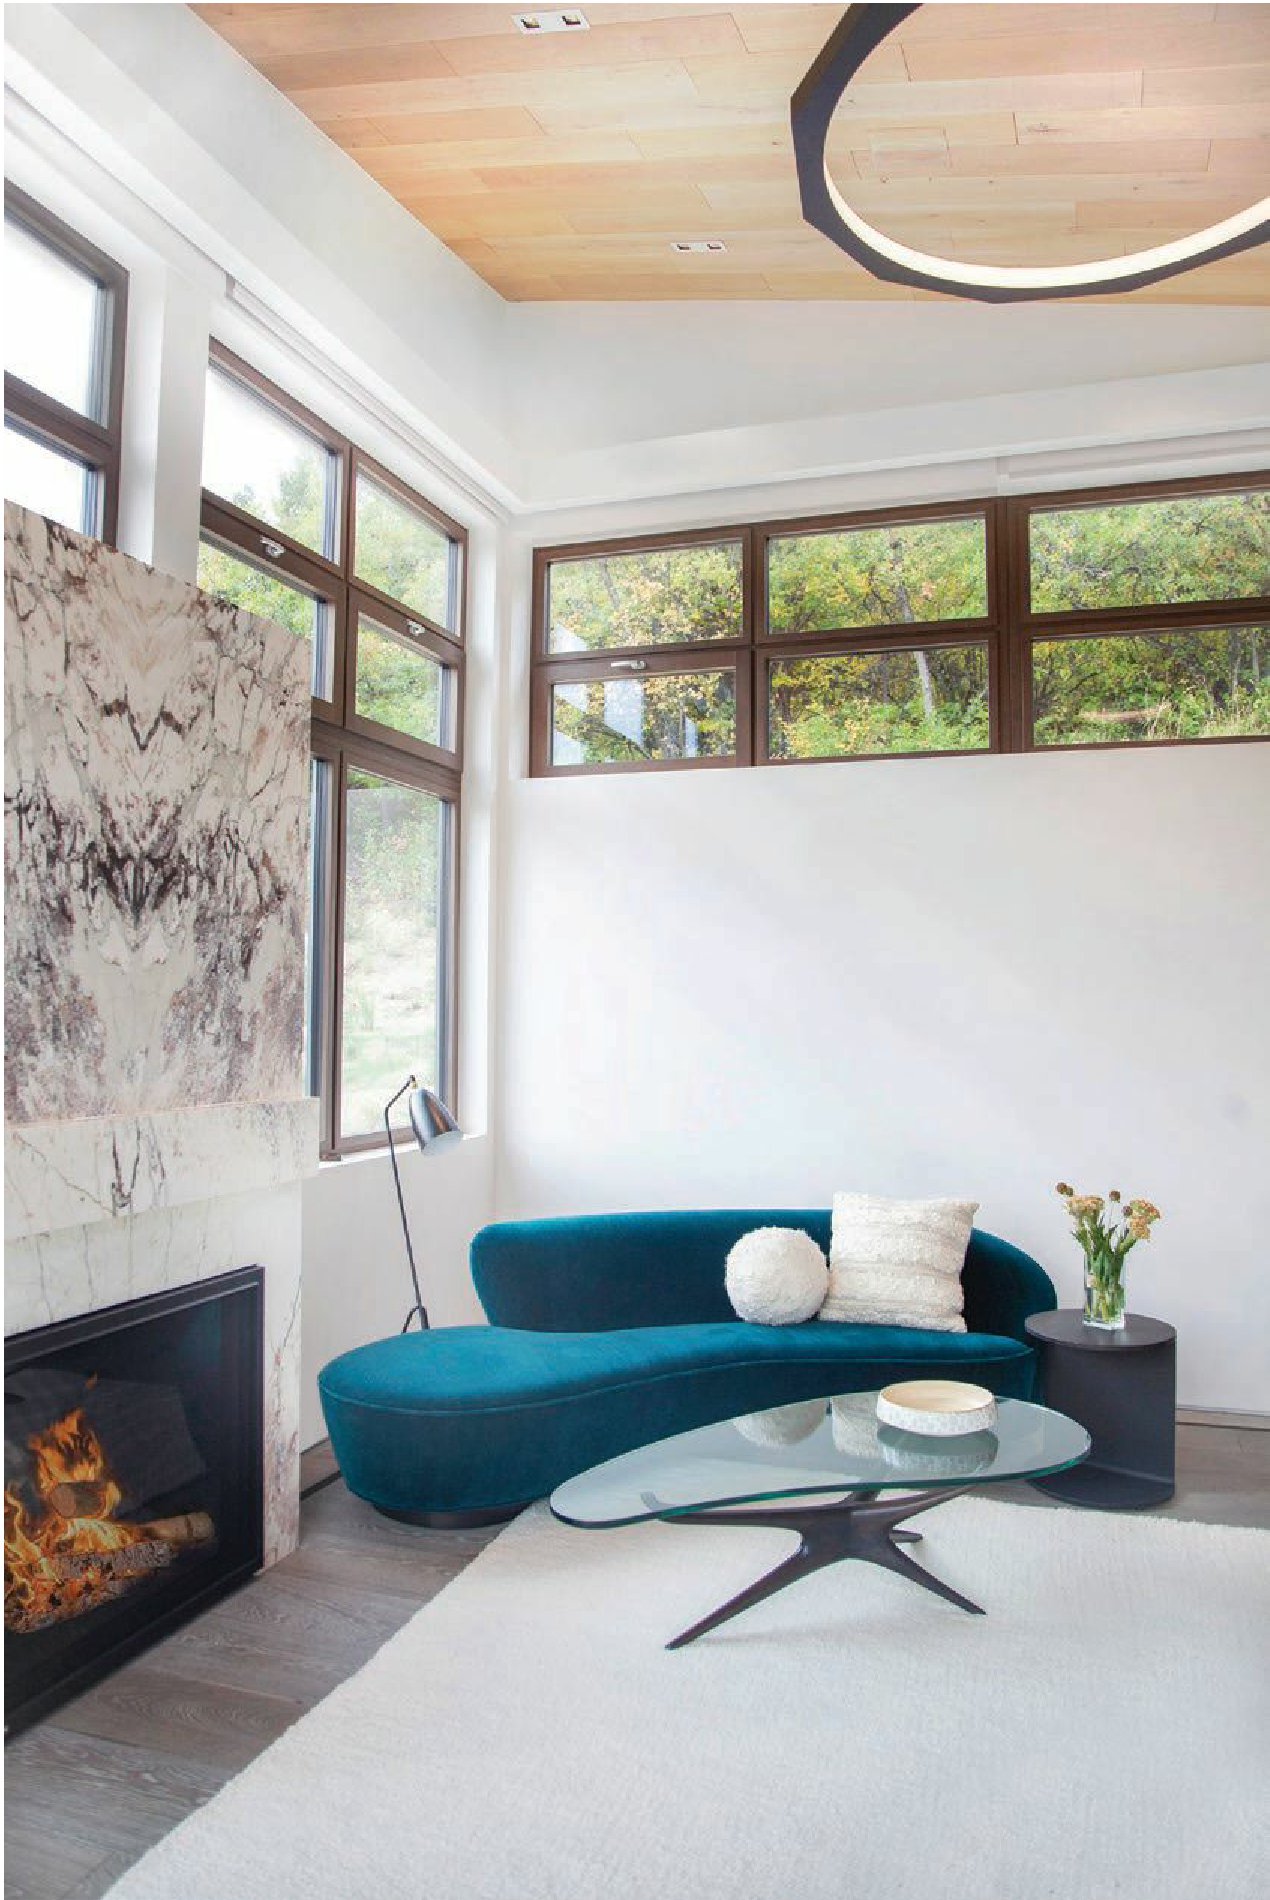 The main bedroom features a custom marble slab above the fireplace Photographed by Michael Brands and Brooke Casillas